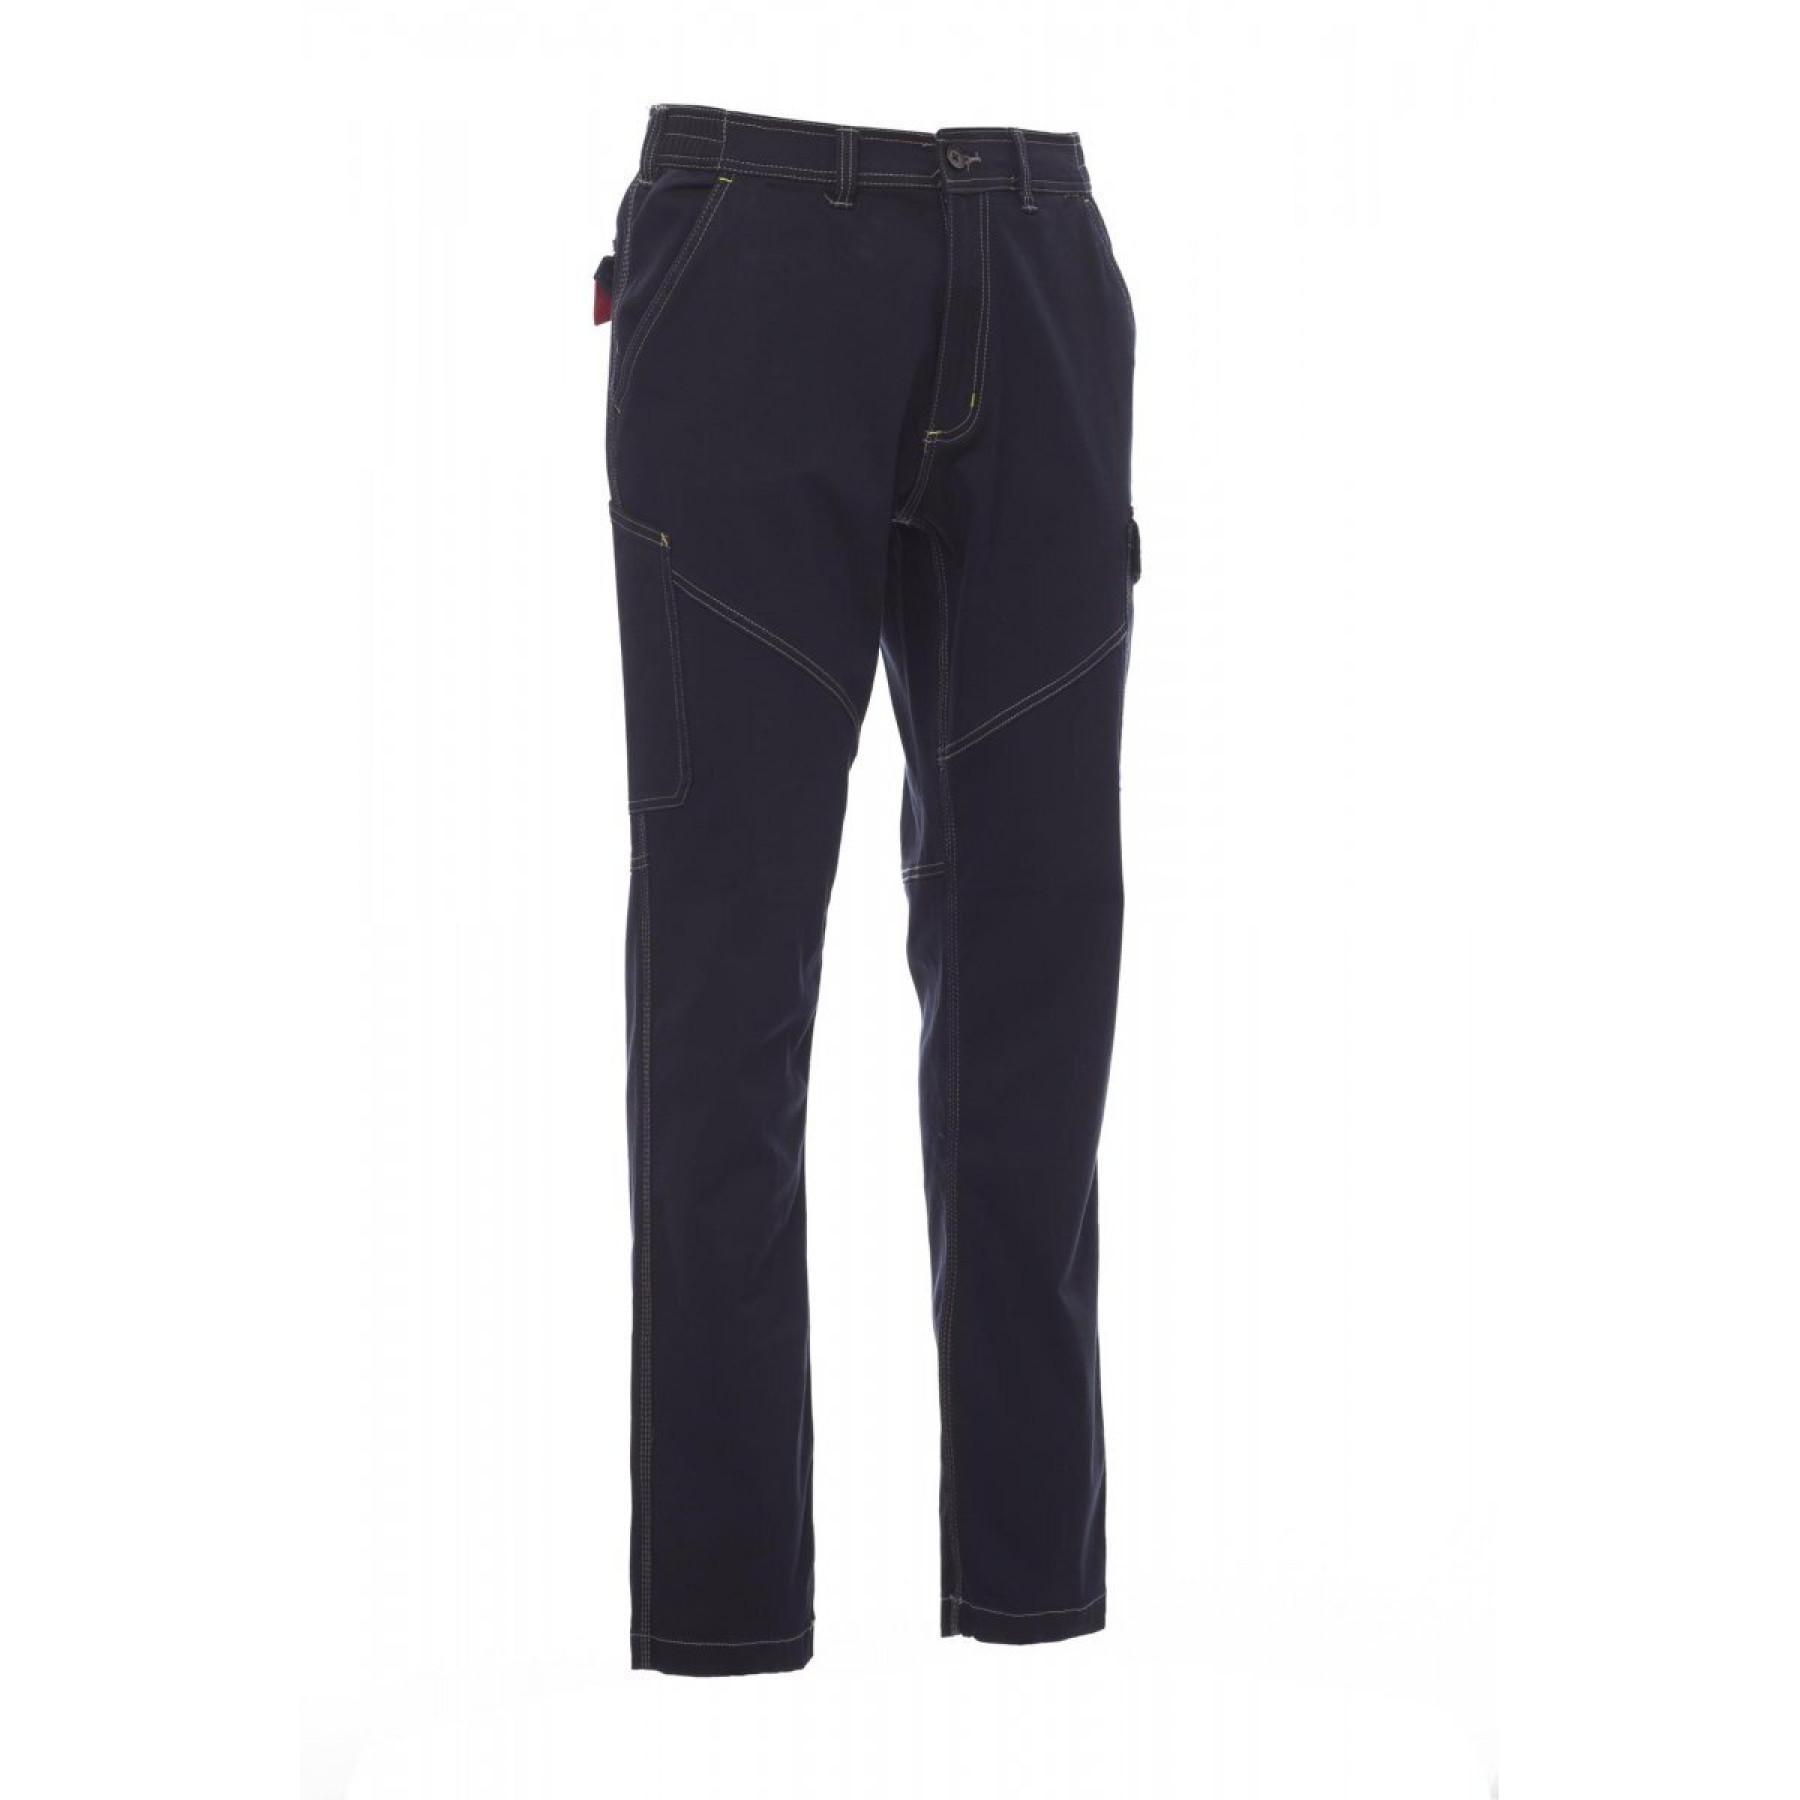 Payper Worker Stretch Pants